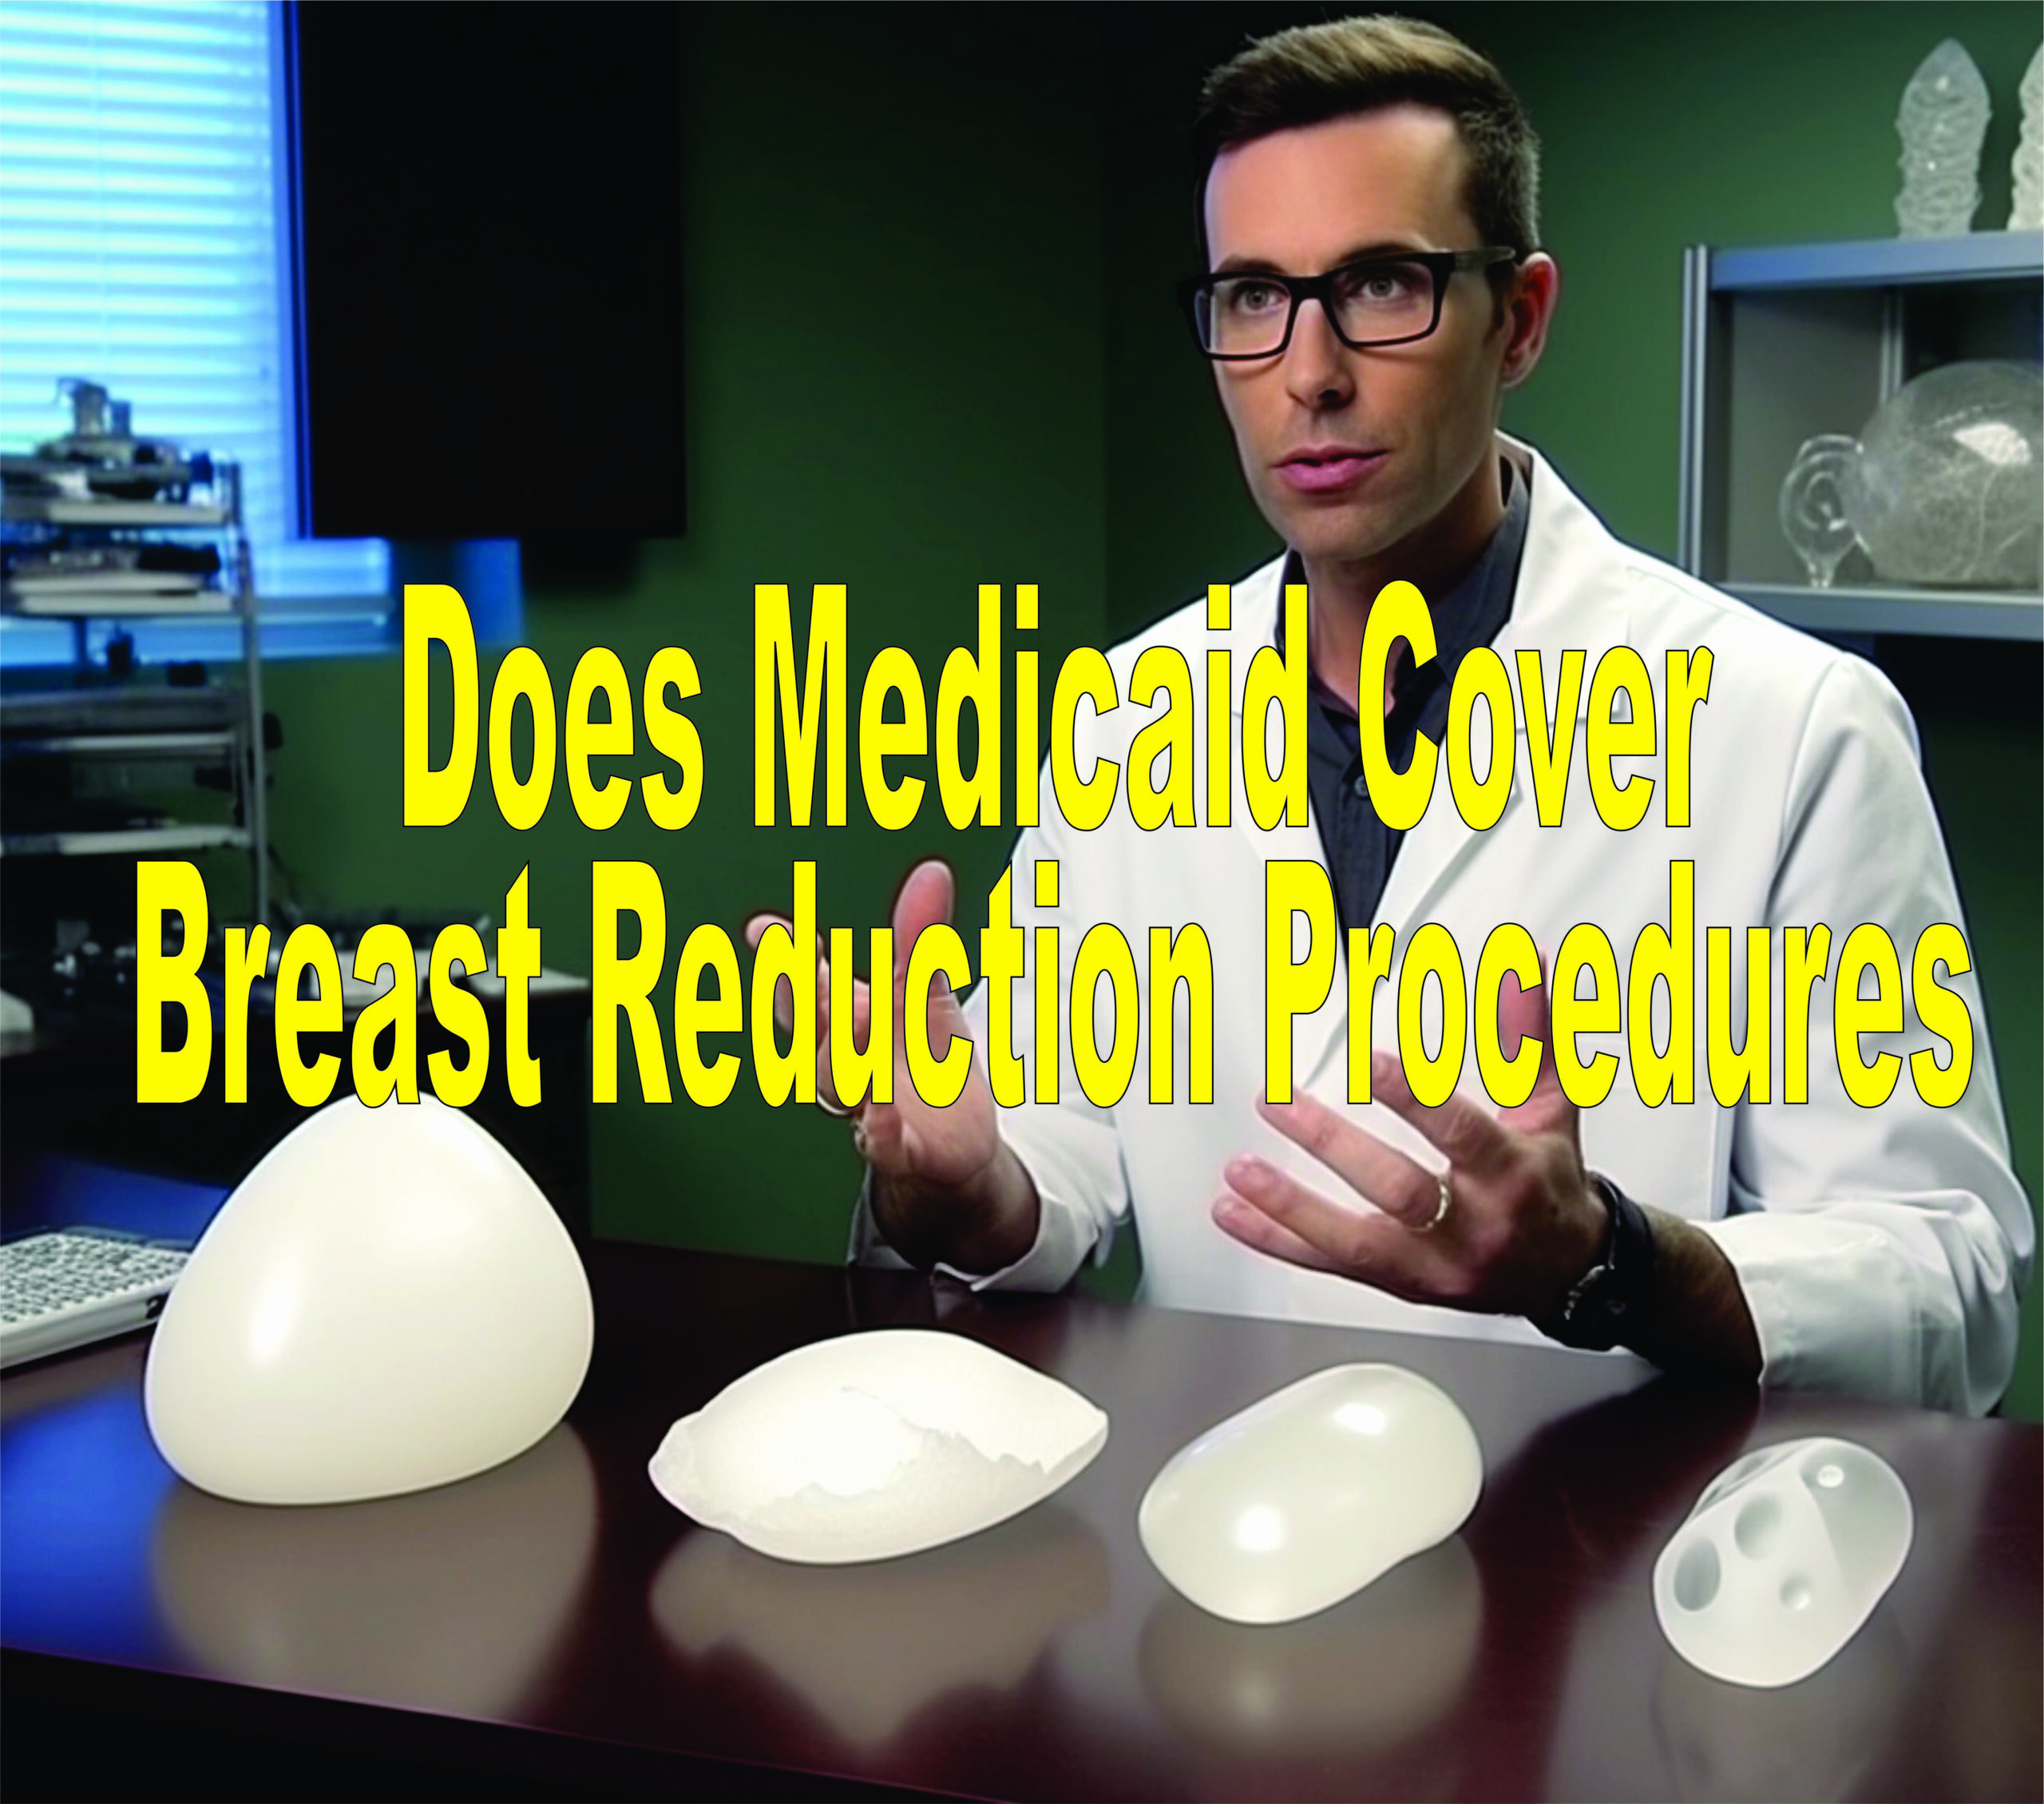 Does Medicaid Cover Breast Reduction Procedures